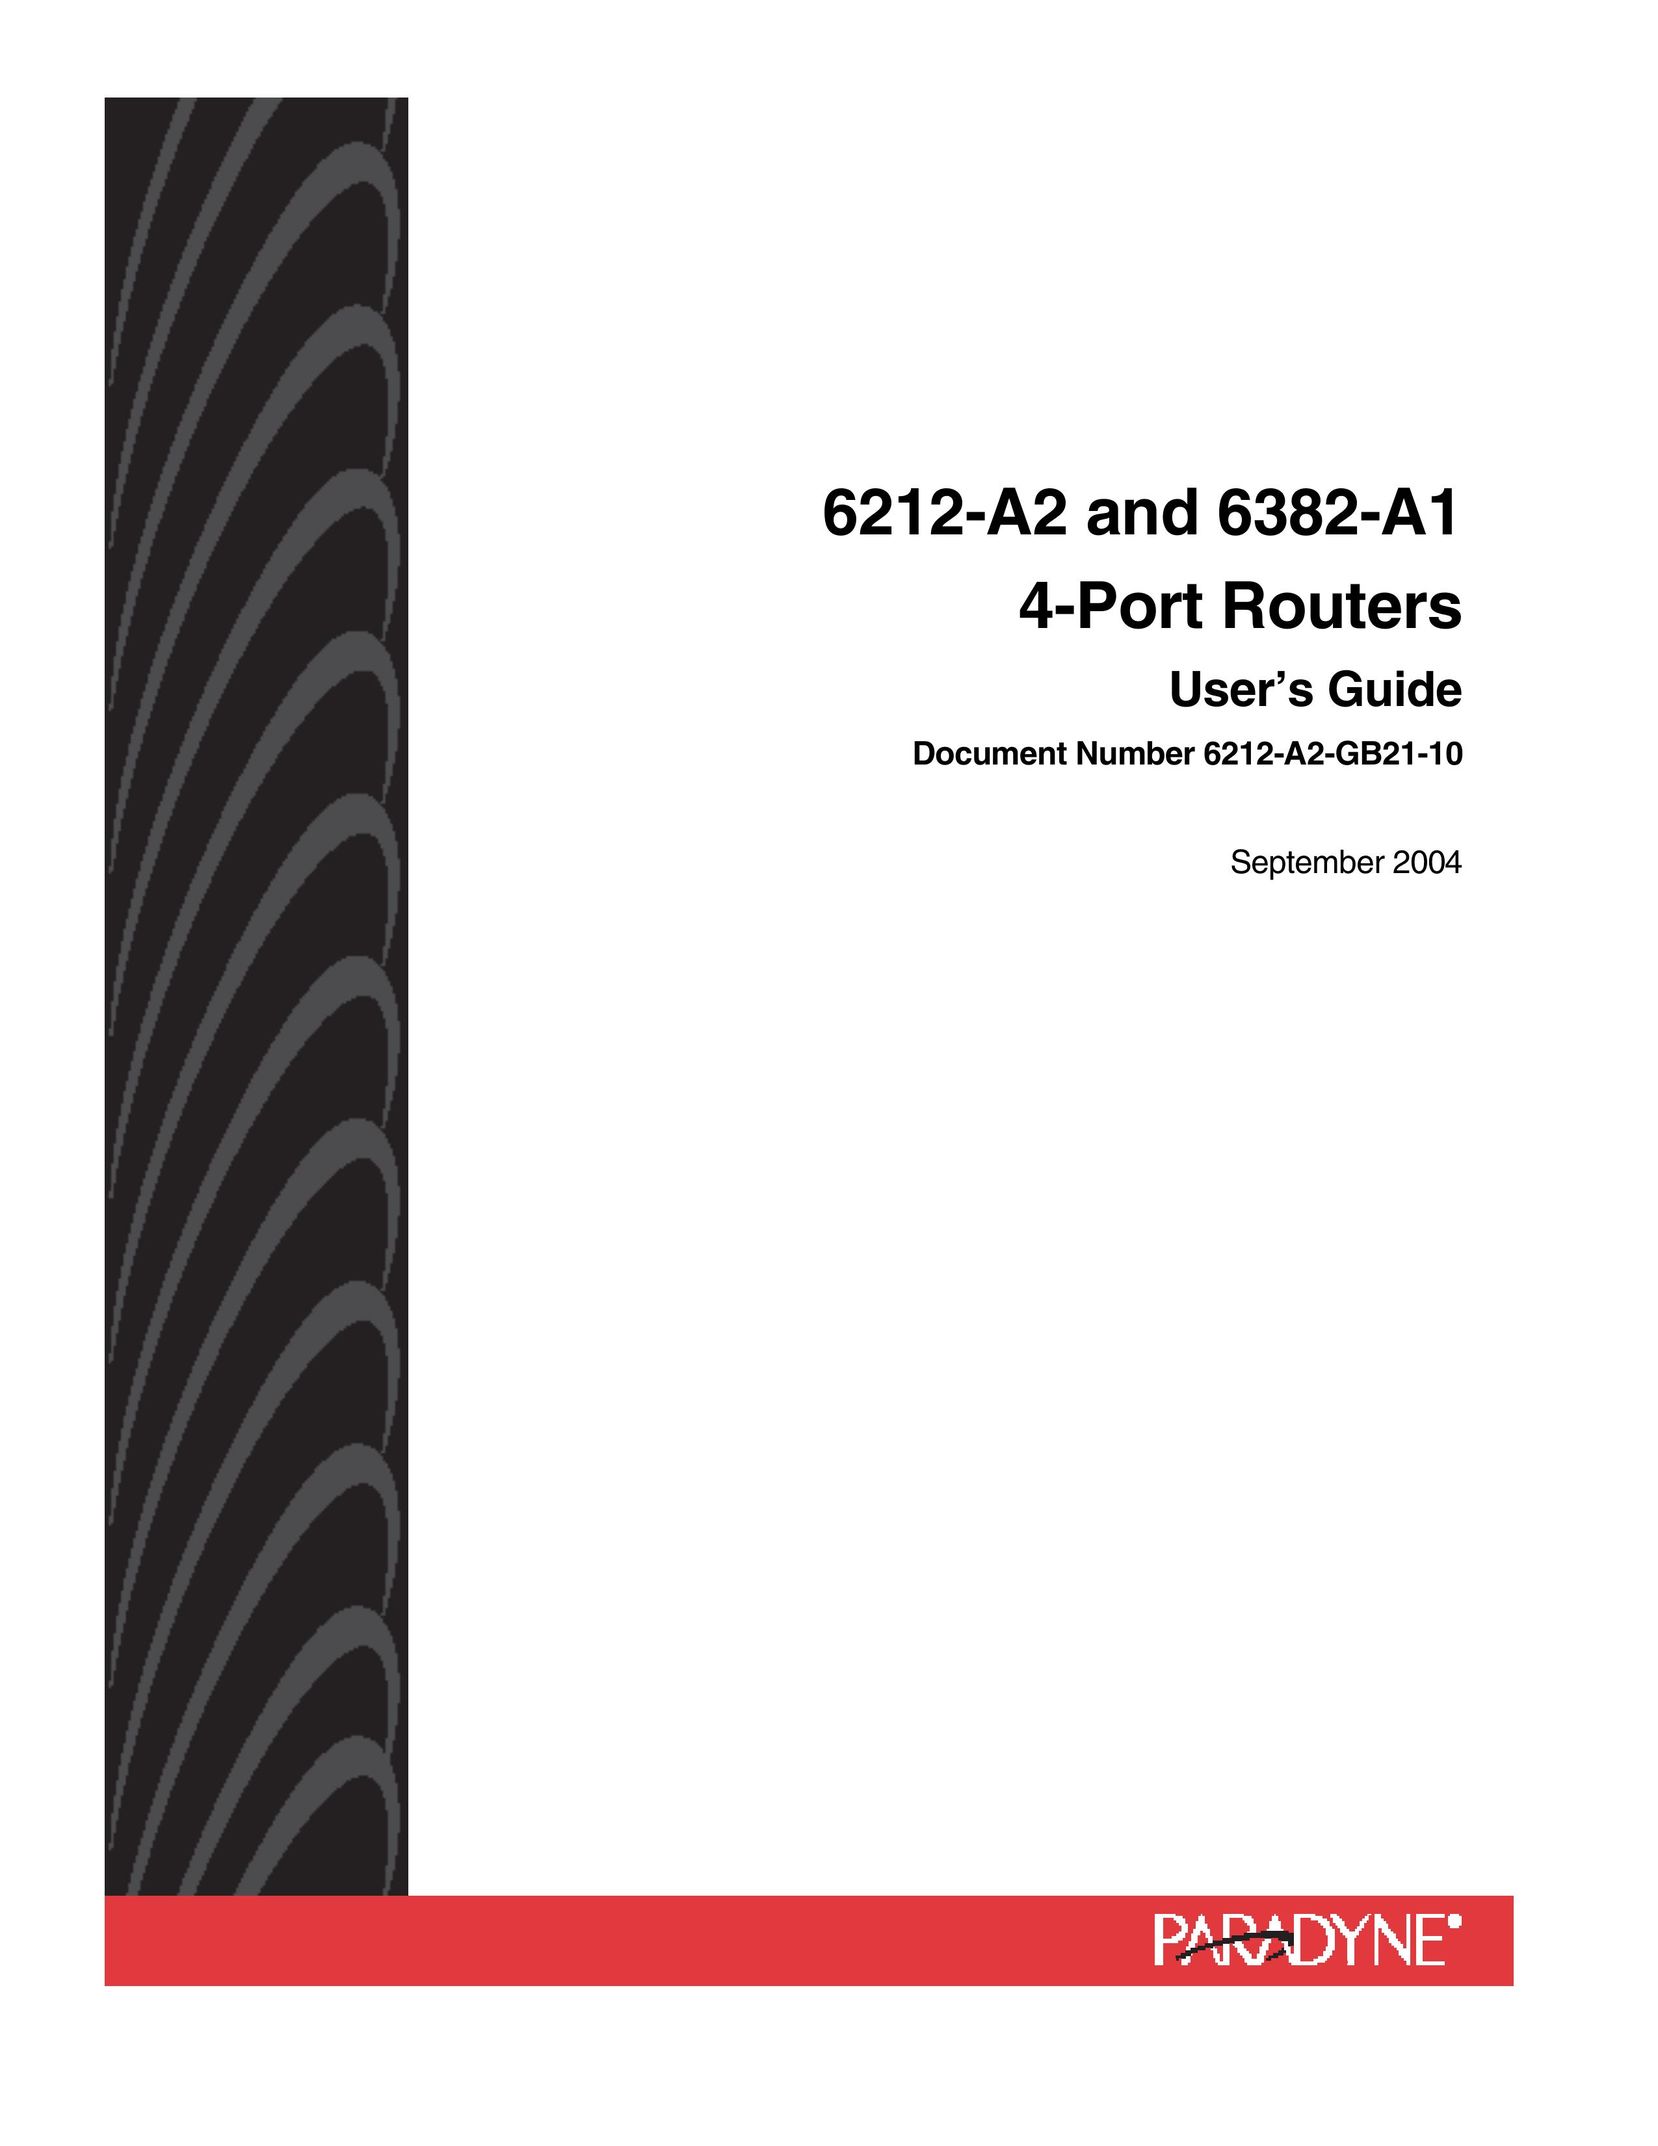 Paradyne 6382-A1 Network Router User Manual